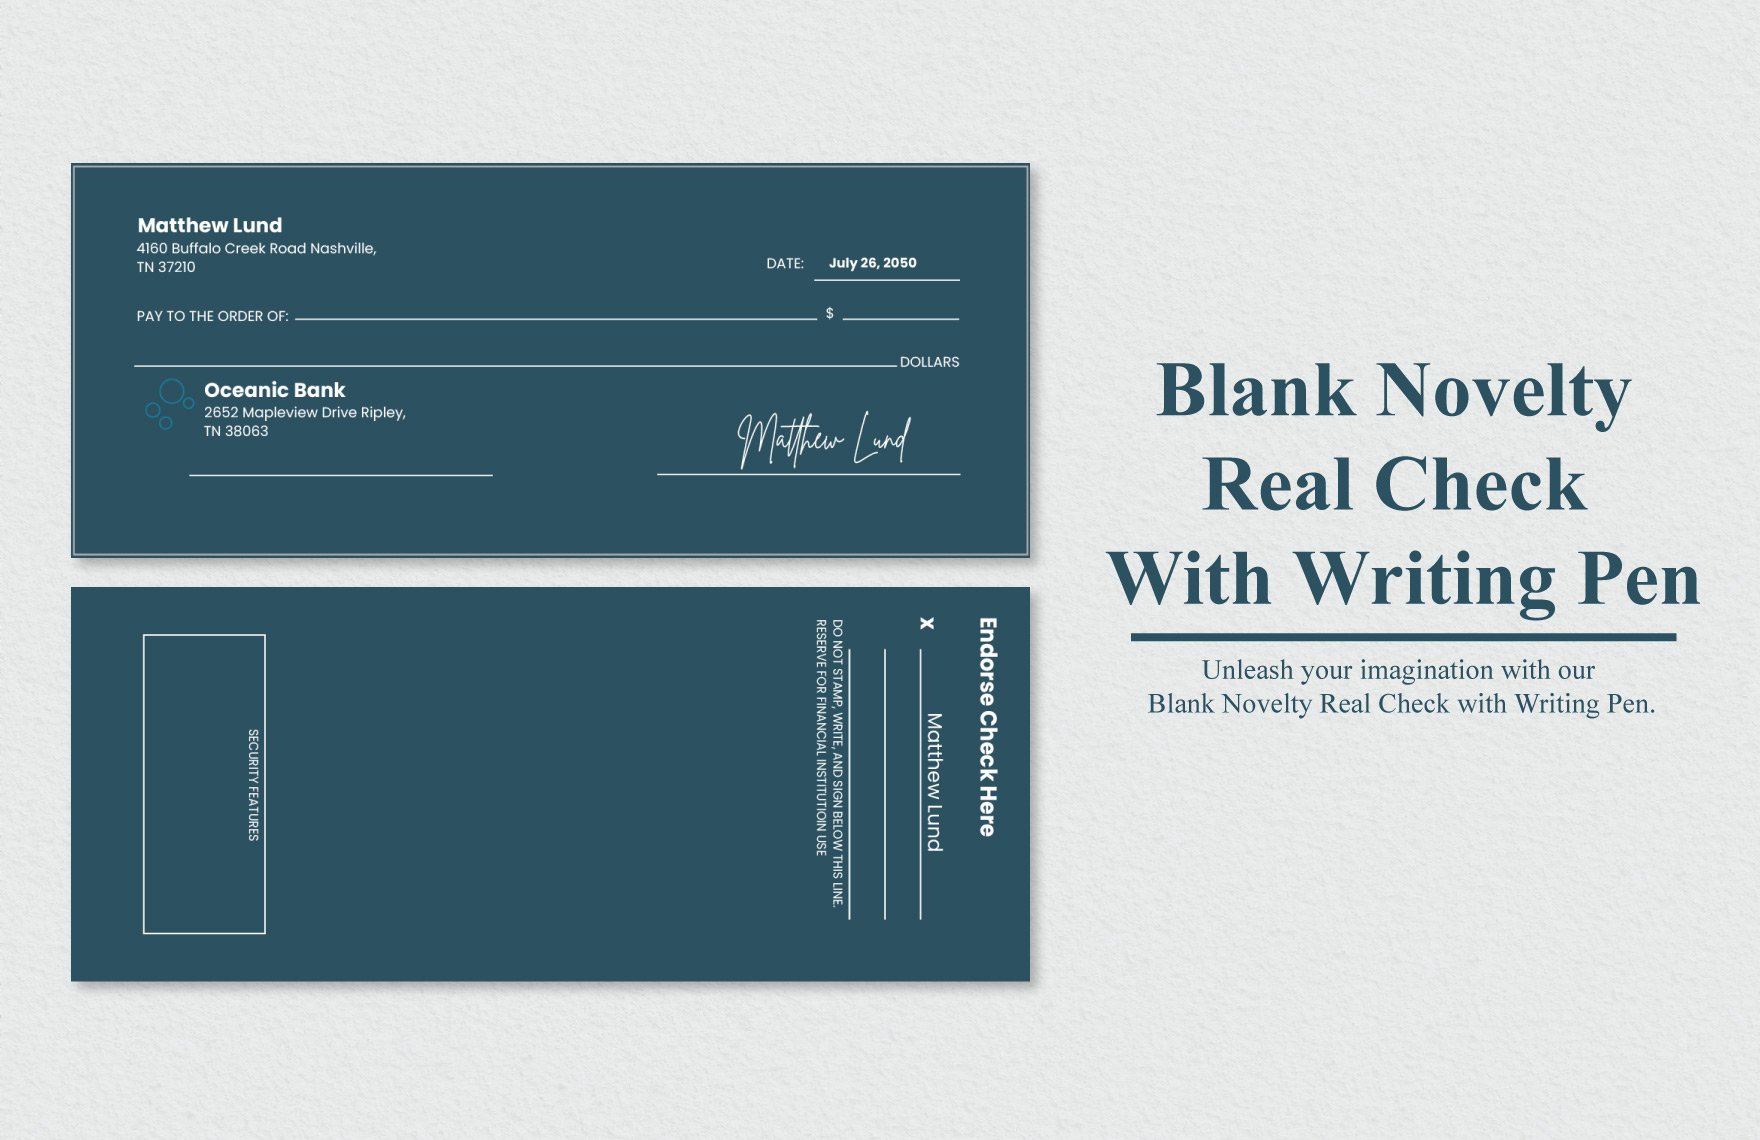 Blank Novelty Real Check With Writing Pen in Word, Illustrator, PSD